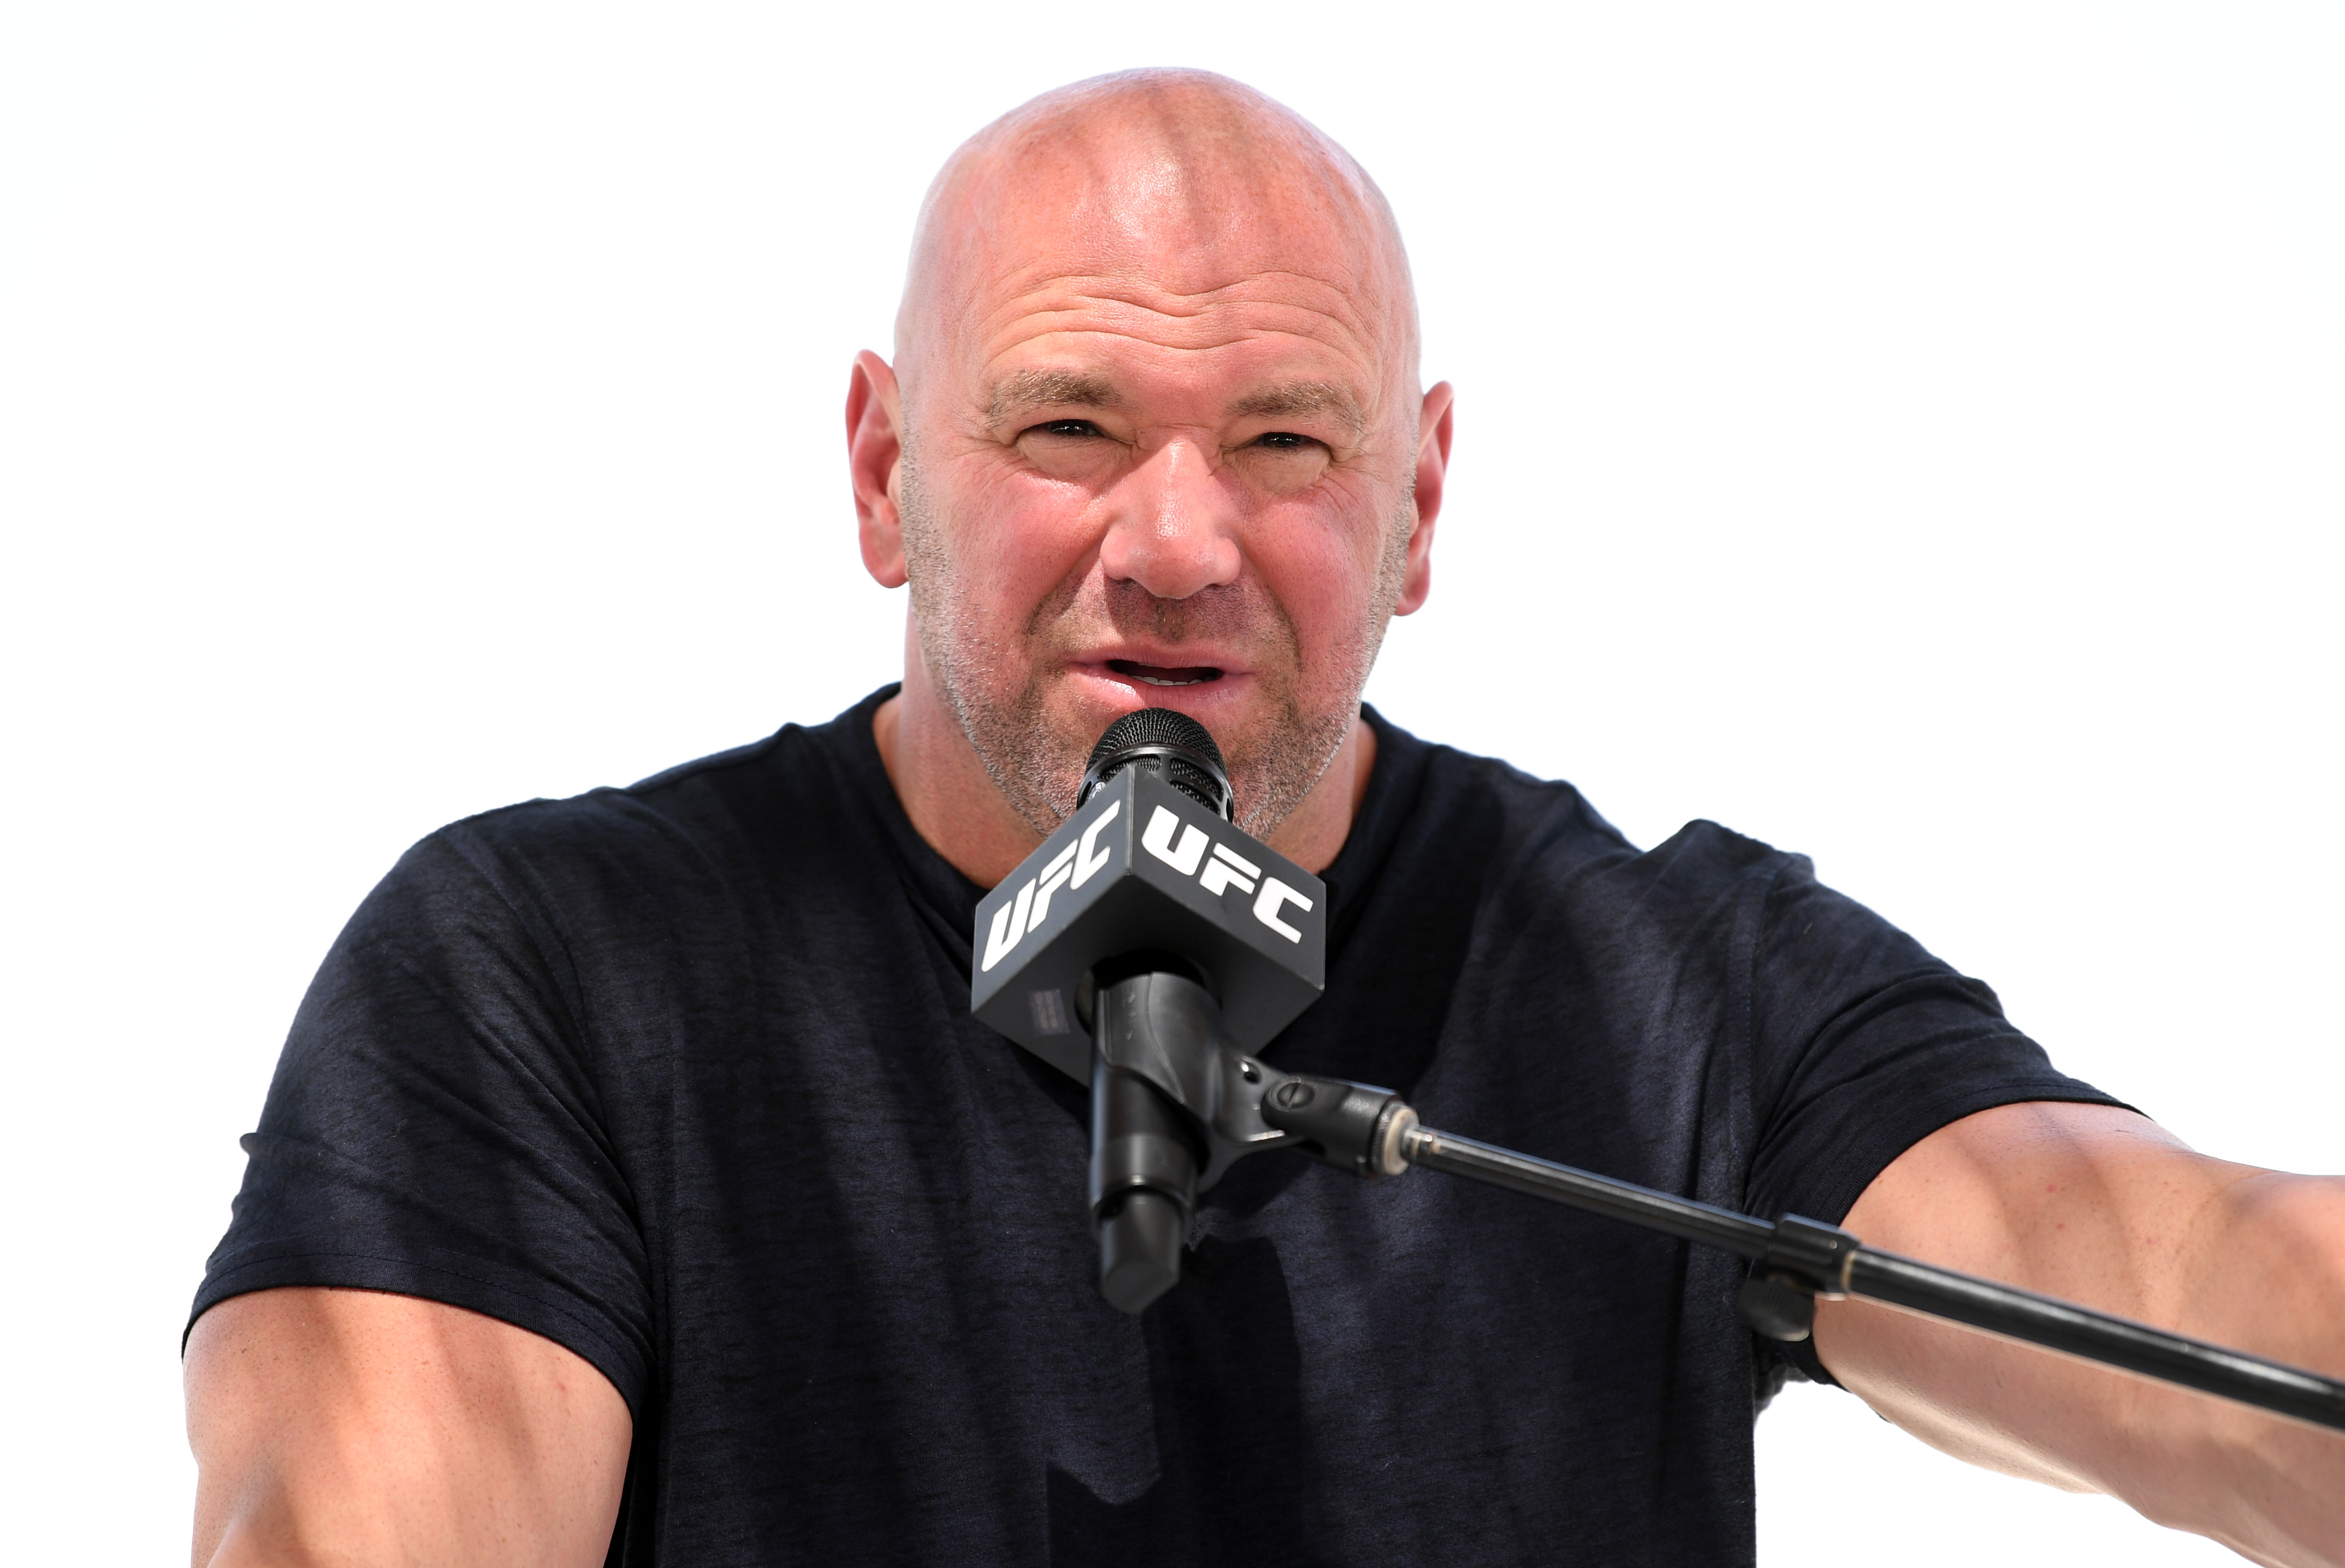 Dana White Just Responded to His $10 Million Sex Tape Lawsuit: ‘I Can Get Rid of These Scumbags Forever’